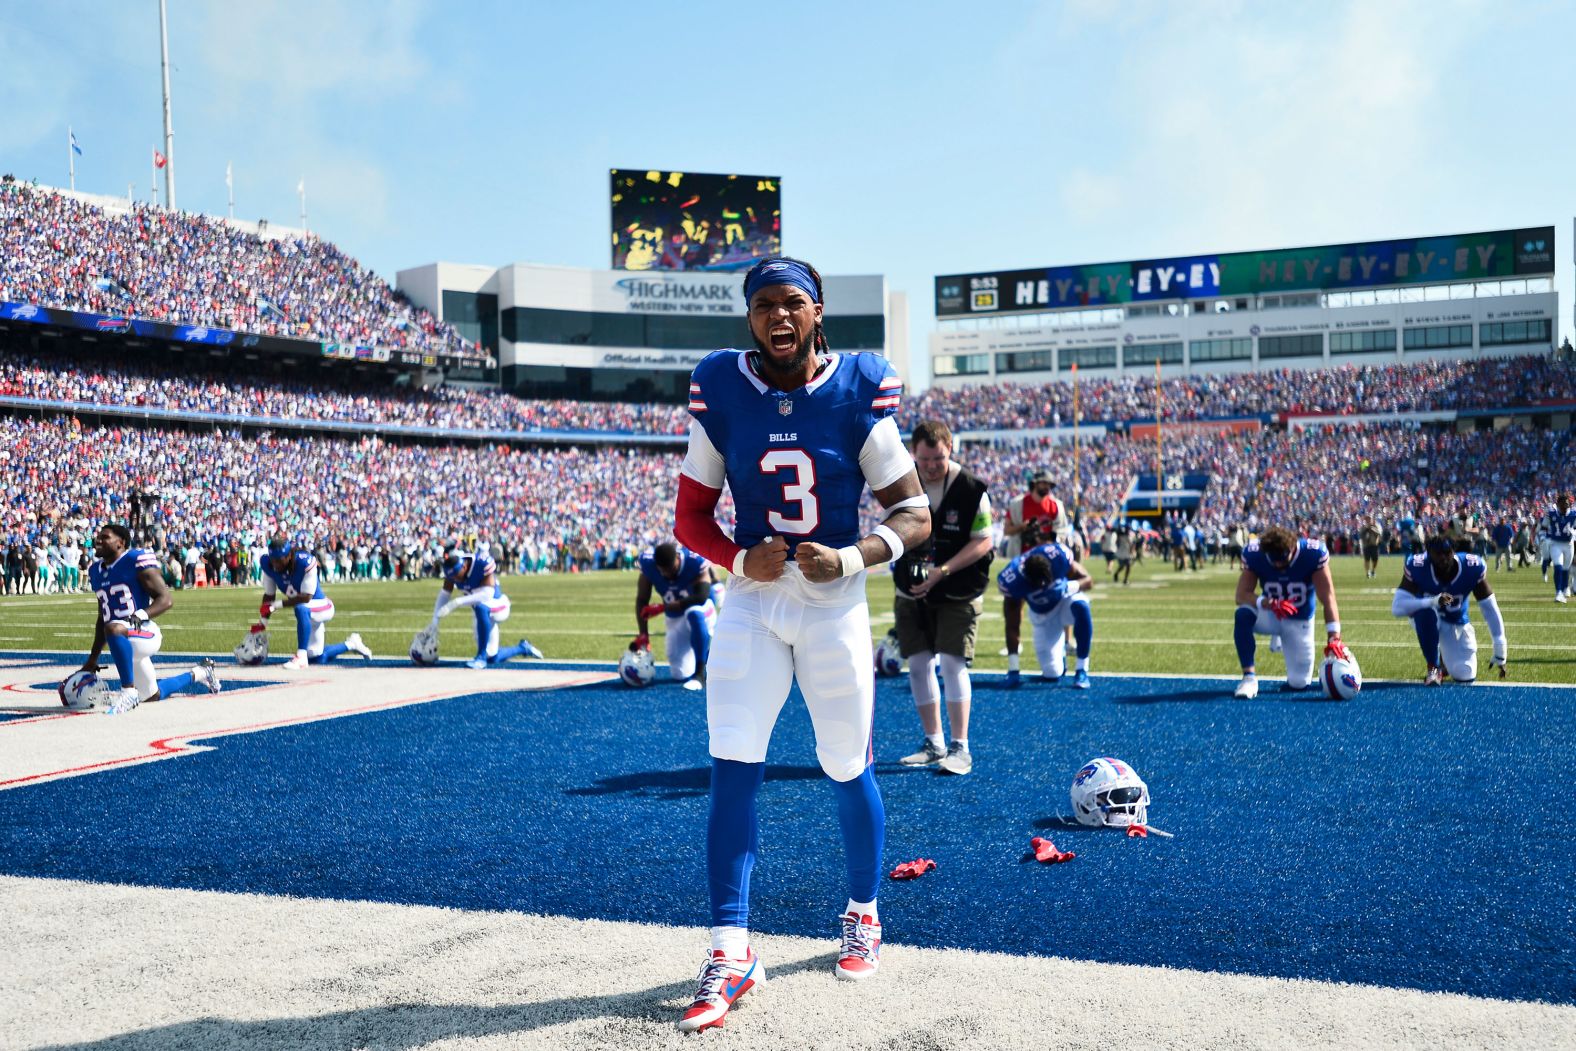 Buffalo Bills safety Damar Hamlin shouts while warming up ahead of the Bills game against the Miami Dolphins on October 1. Hamlin participated in the opening kickoff, his first regular season appearance after surviving a cardiac arrest on the field nearly nine months ago. The Bills beat the Dolphins 48-20.